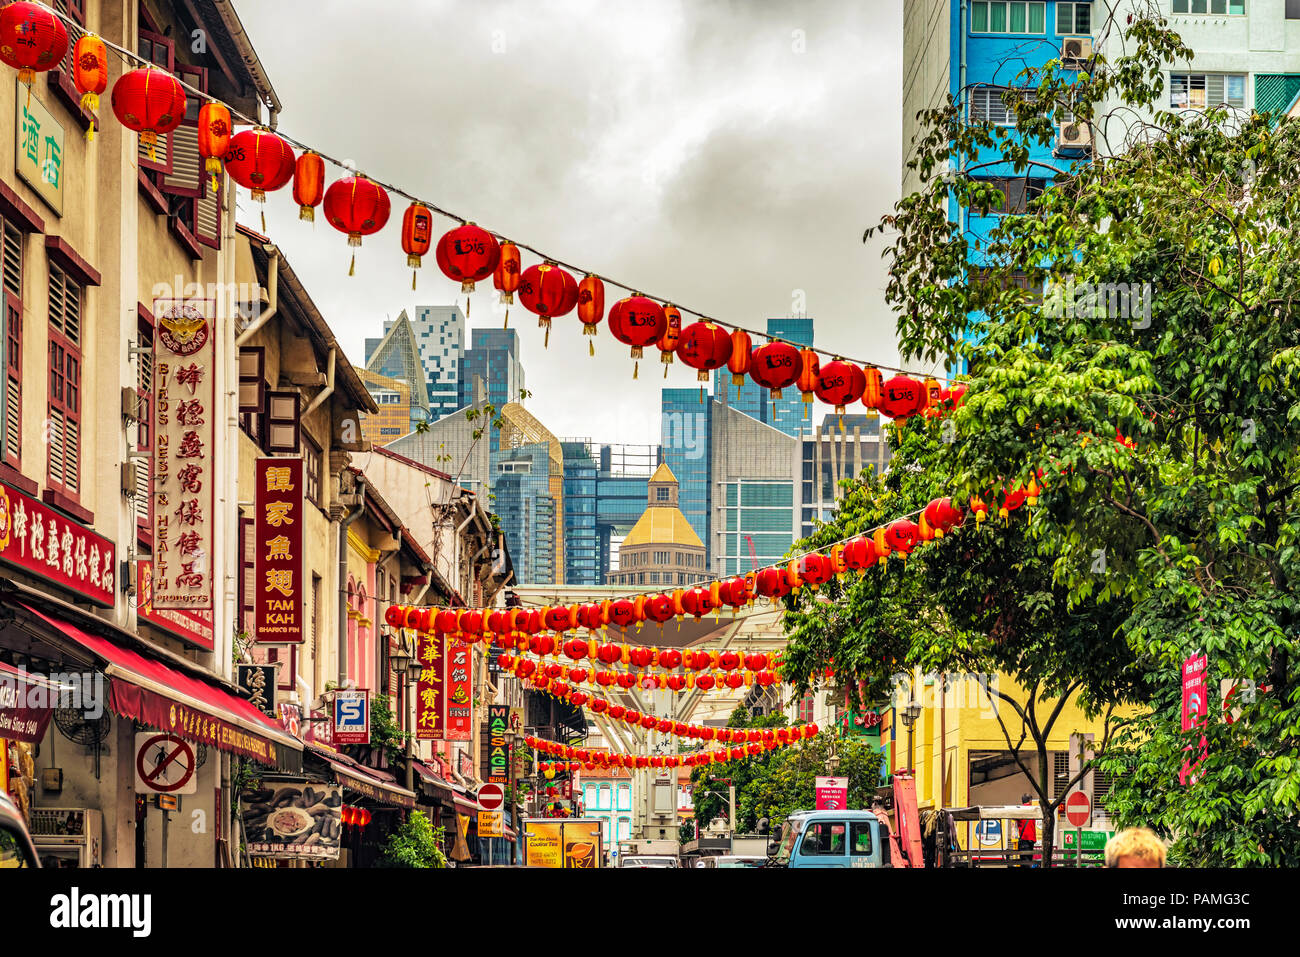 Singapore - January 12, 2018: Signs at the street with the old colonial houses in the part of Singapore called Chinatown. Stock Photo